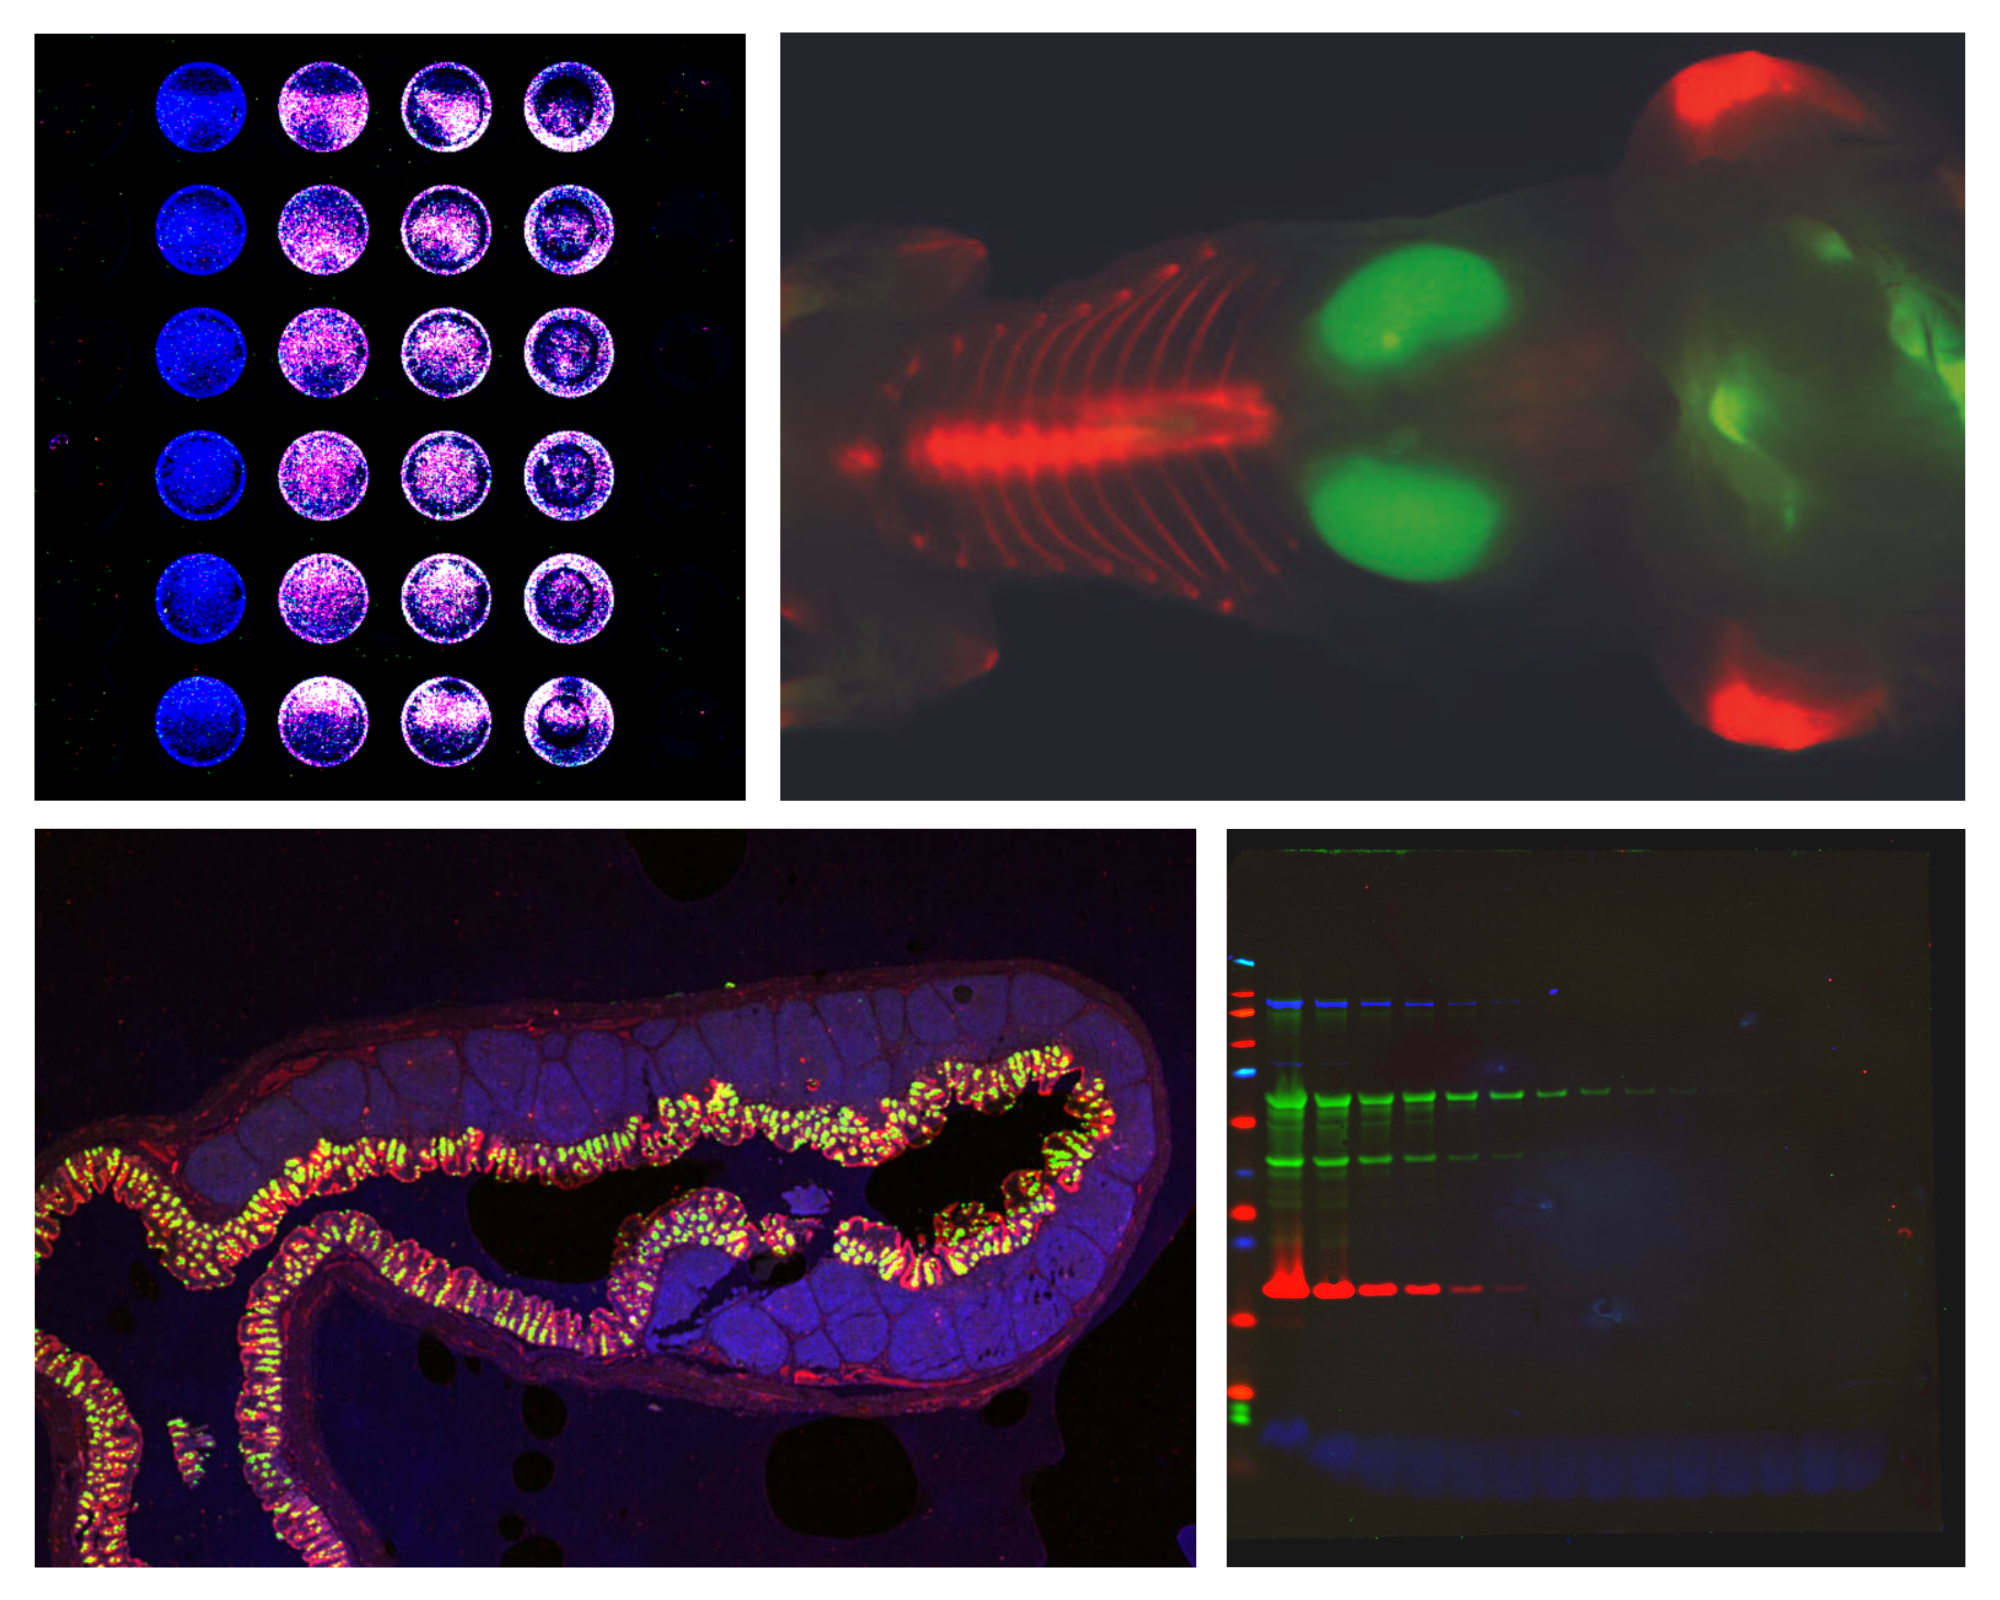 Data images from assays that can be analyzed in Empiria Studio